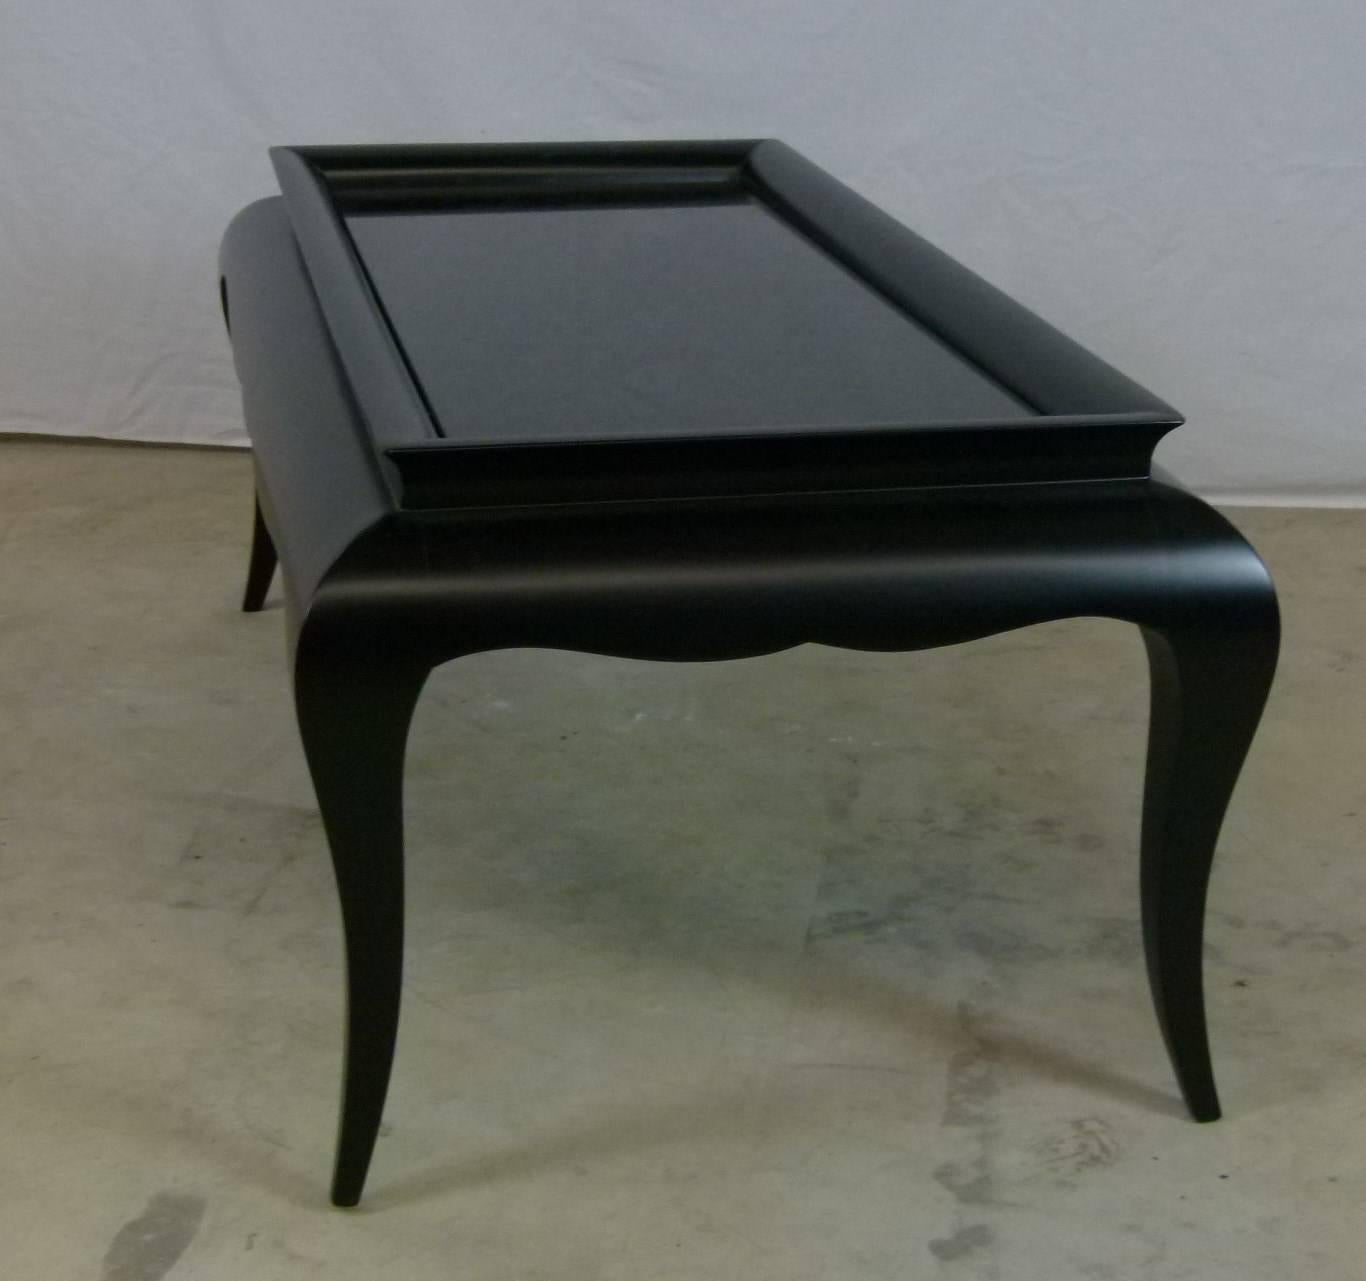 Coffee table, in satin black lacquer, composed of a black glass opal plate, framed by a black lacquered wooden frame.
The set rests on four black lacquered saber feet.
This table has been completely restored and re-lacquered, the glass slab is